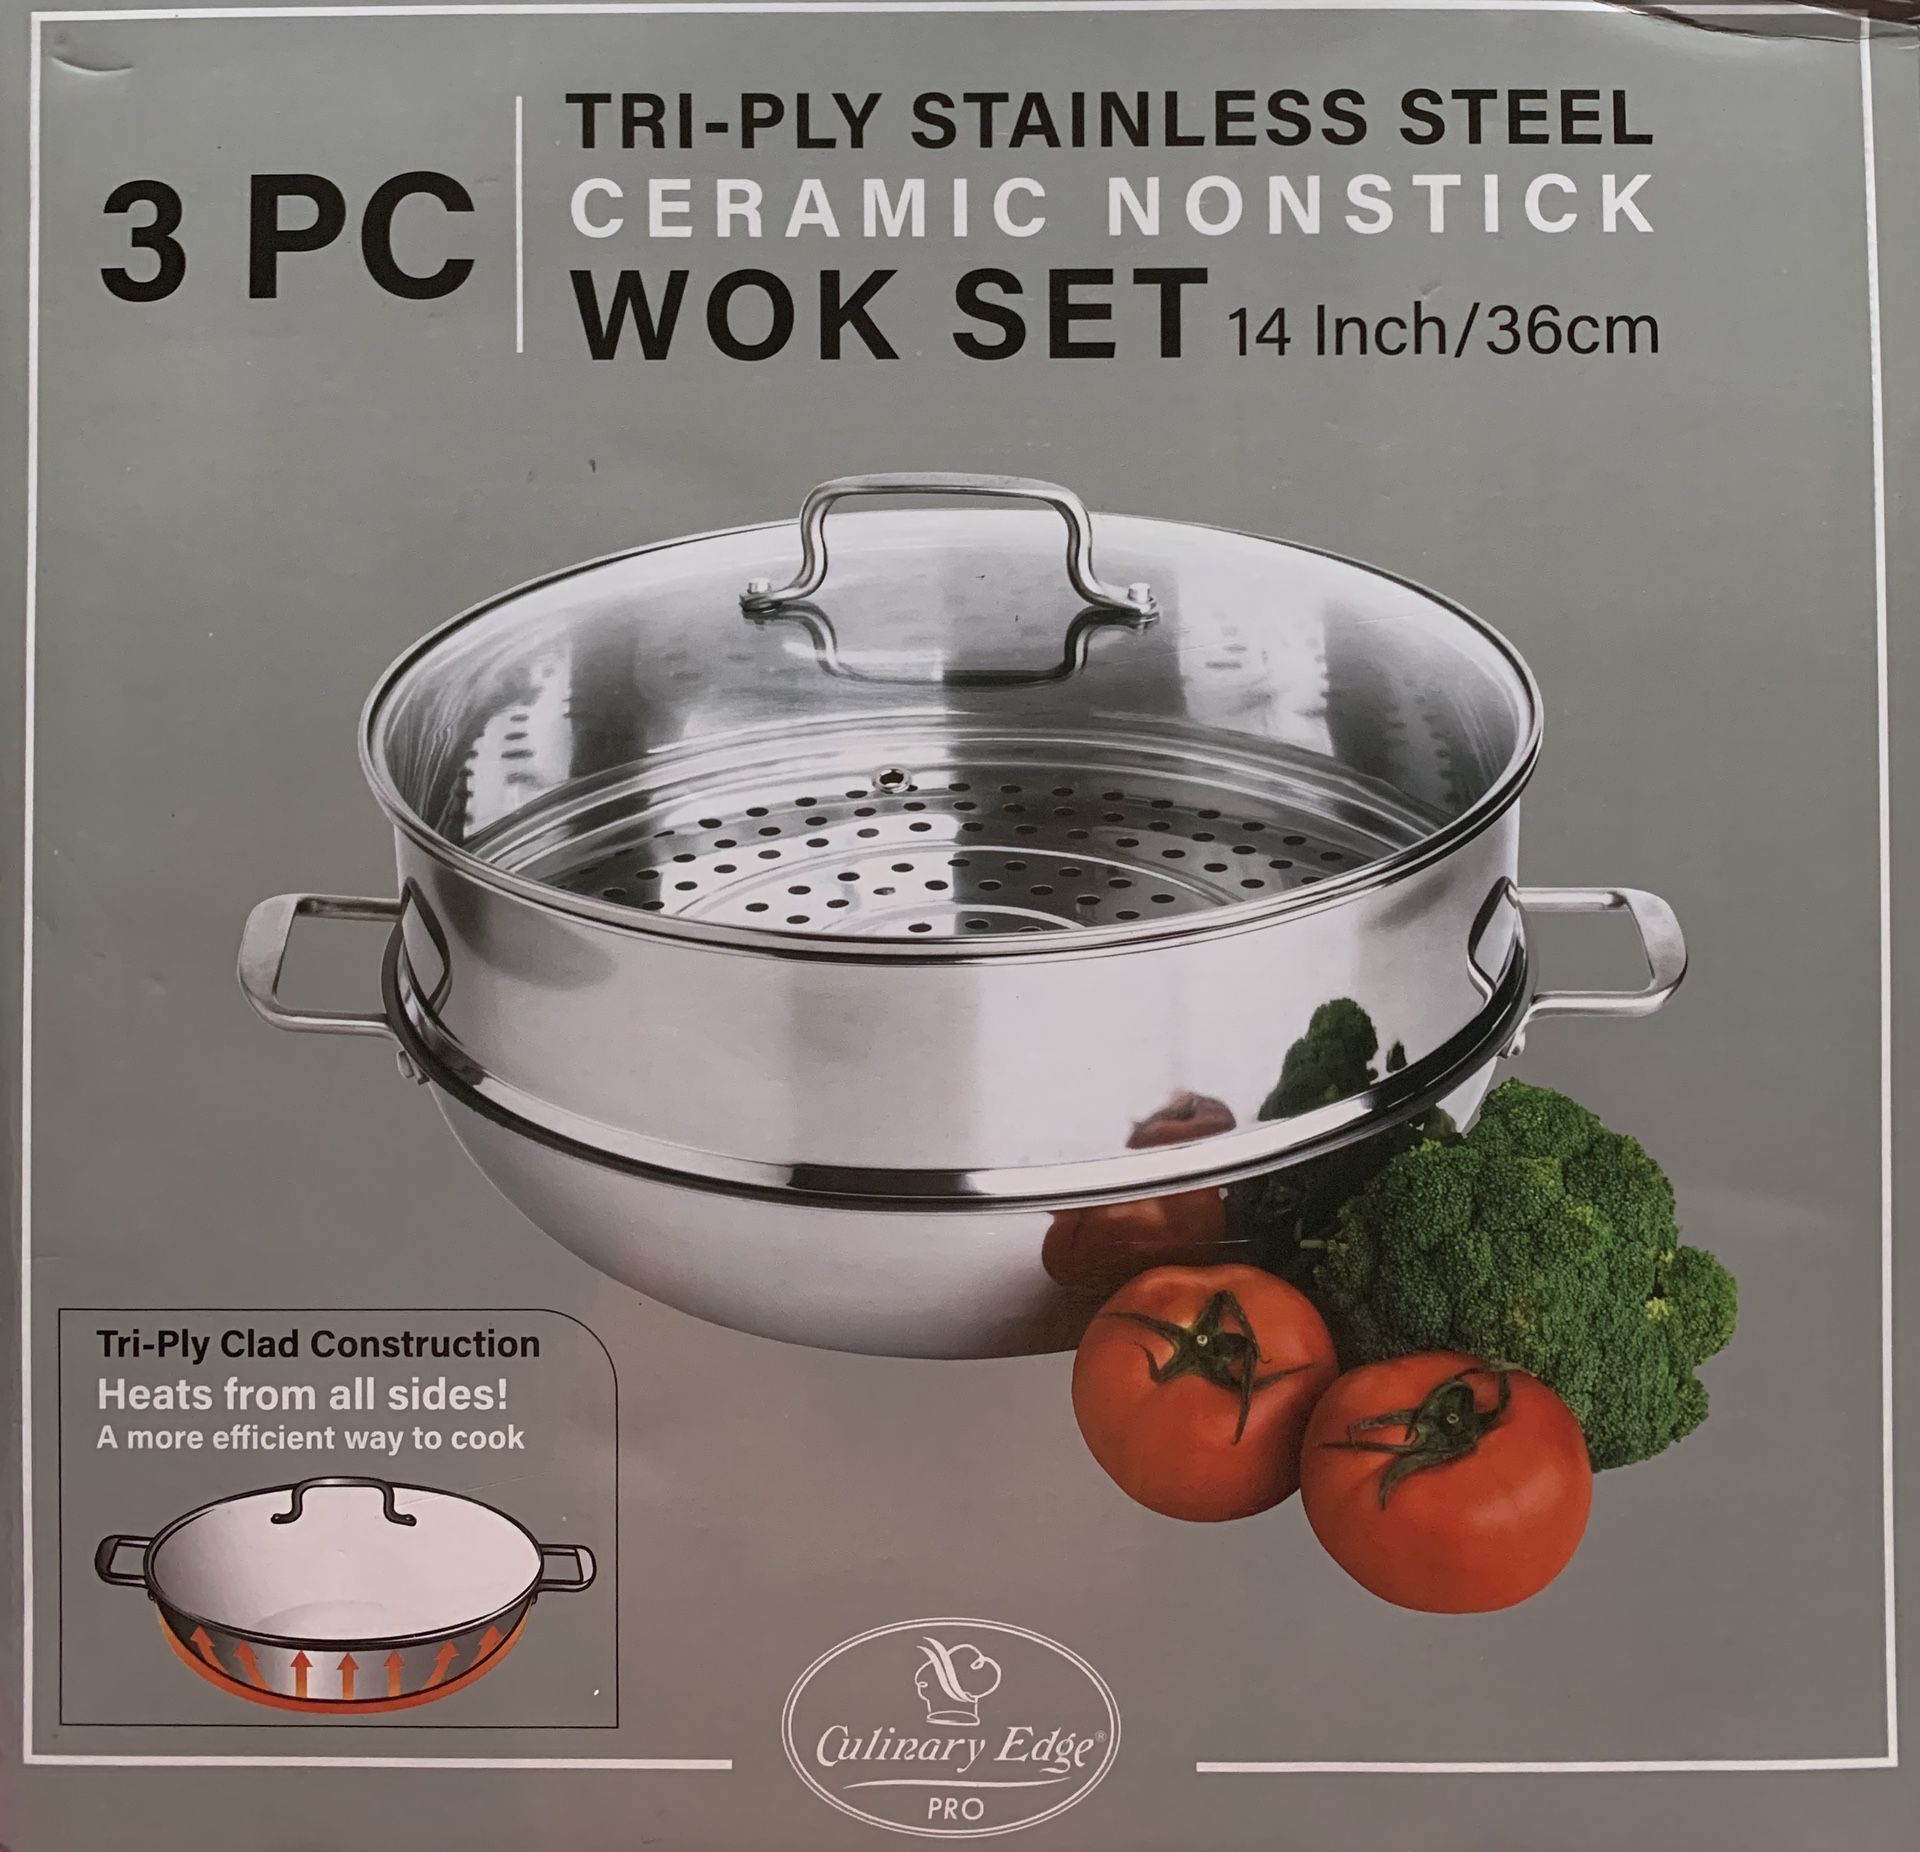 Try-ply Stainless Steal Ceramic Nonstick Wok Set